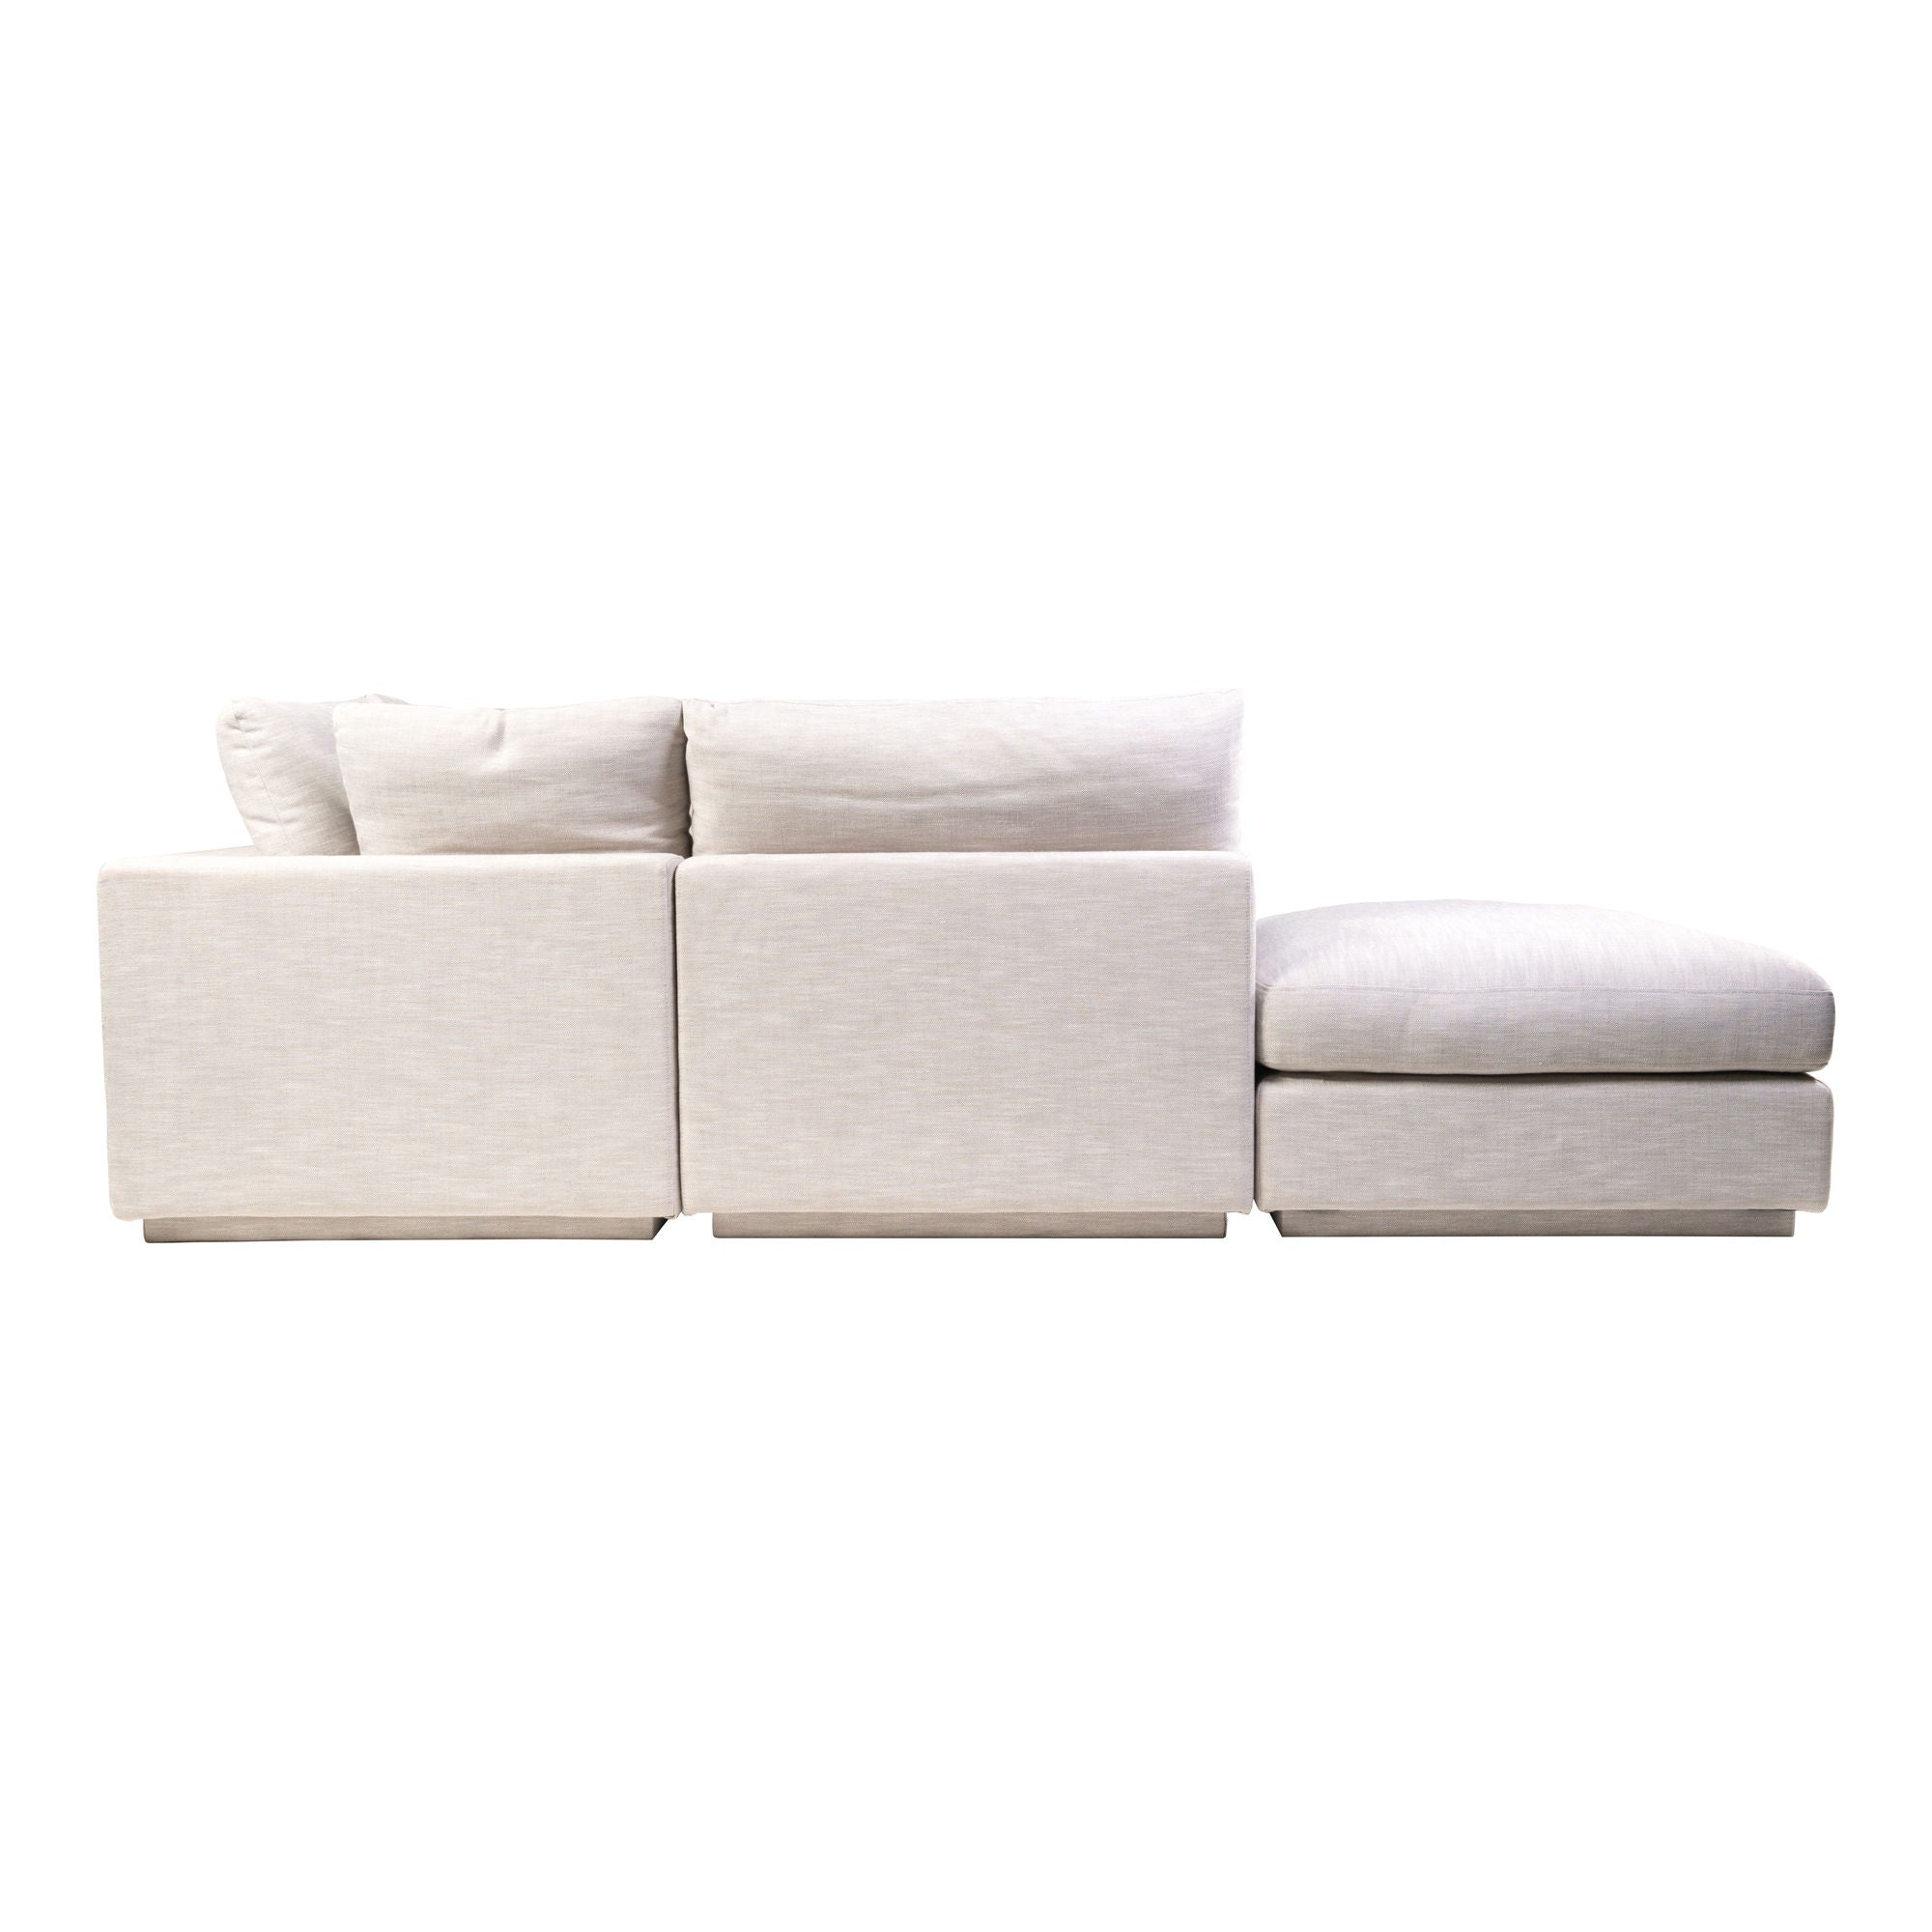 Justin - Dream Modular Sectional - Taupe